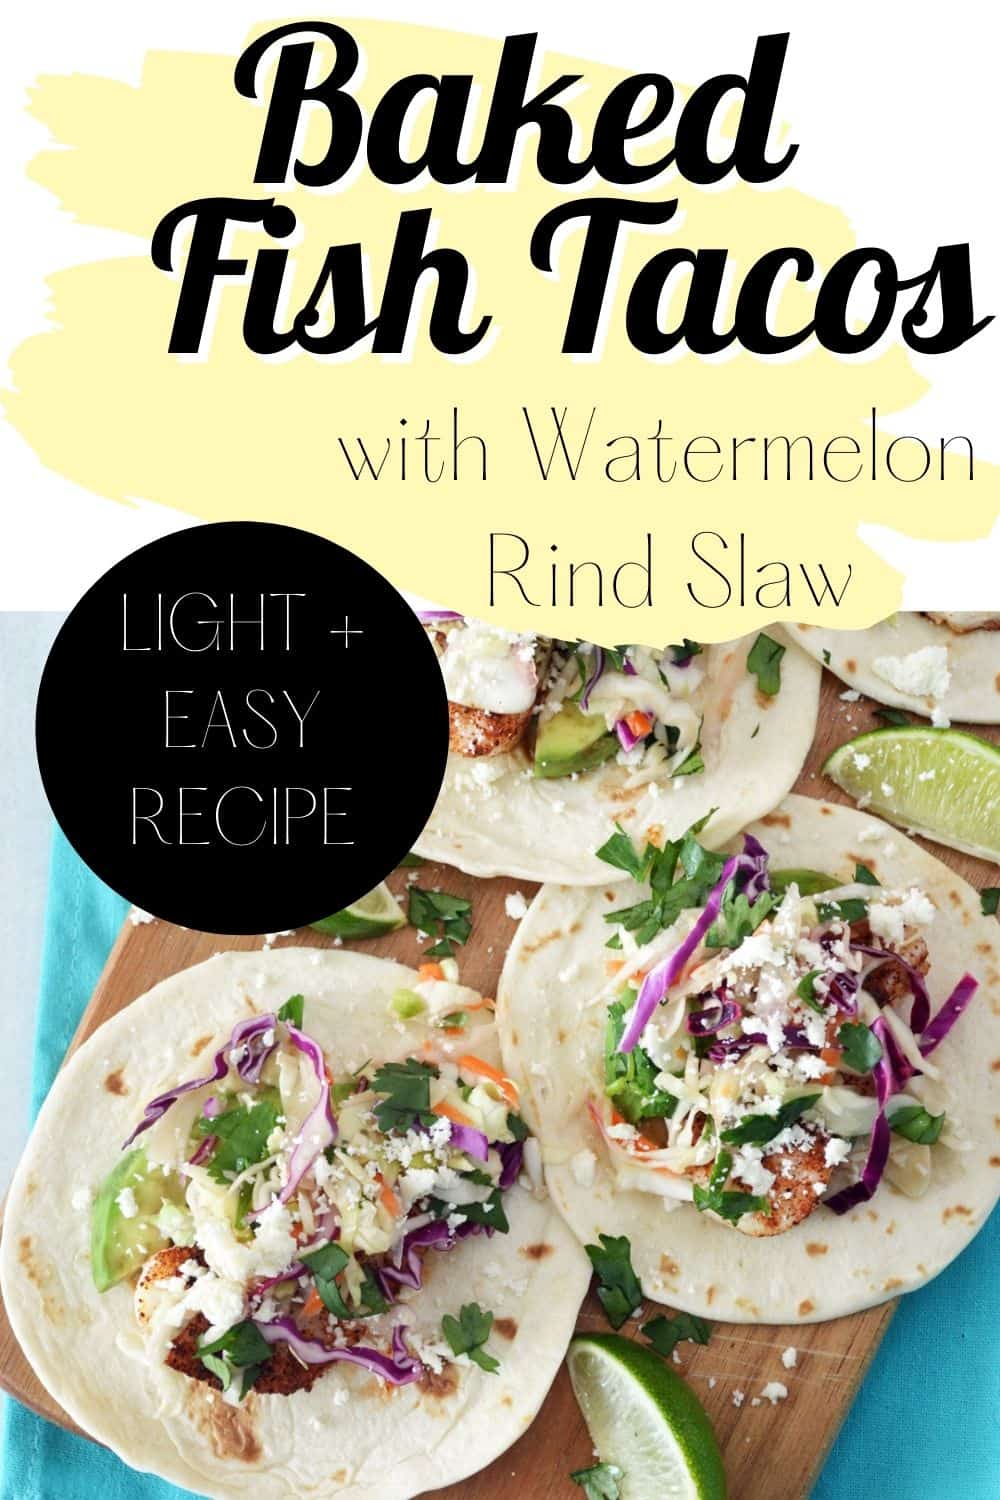 Healthy Baked Fish Tacos with a Watermelon Rind Slaw 